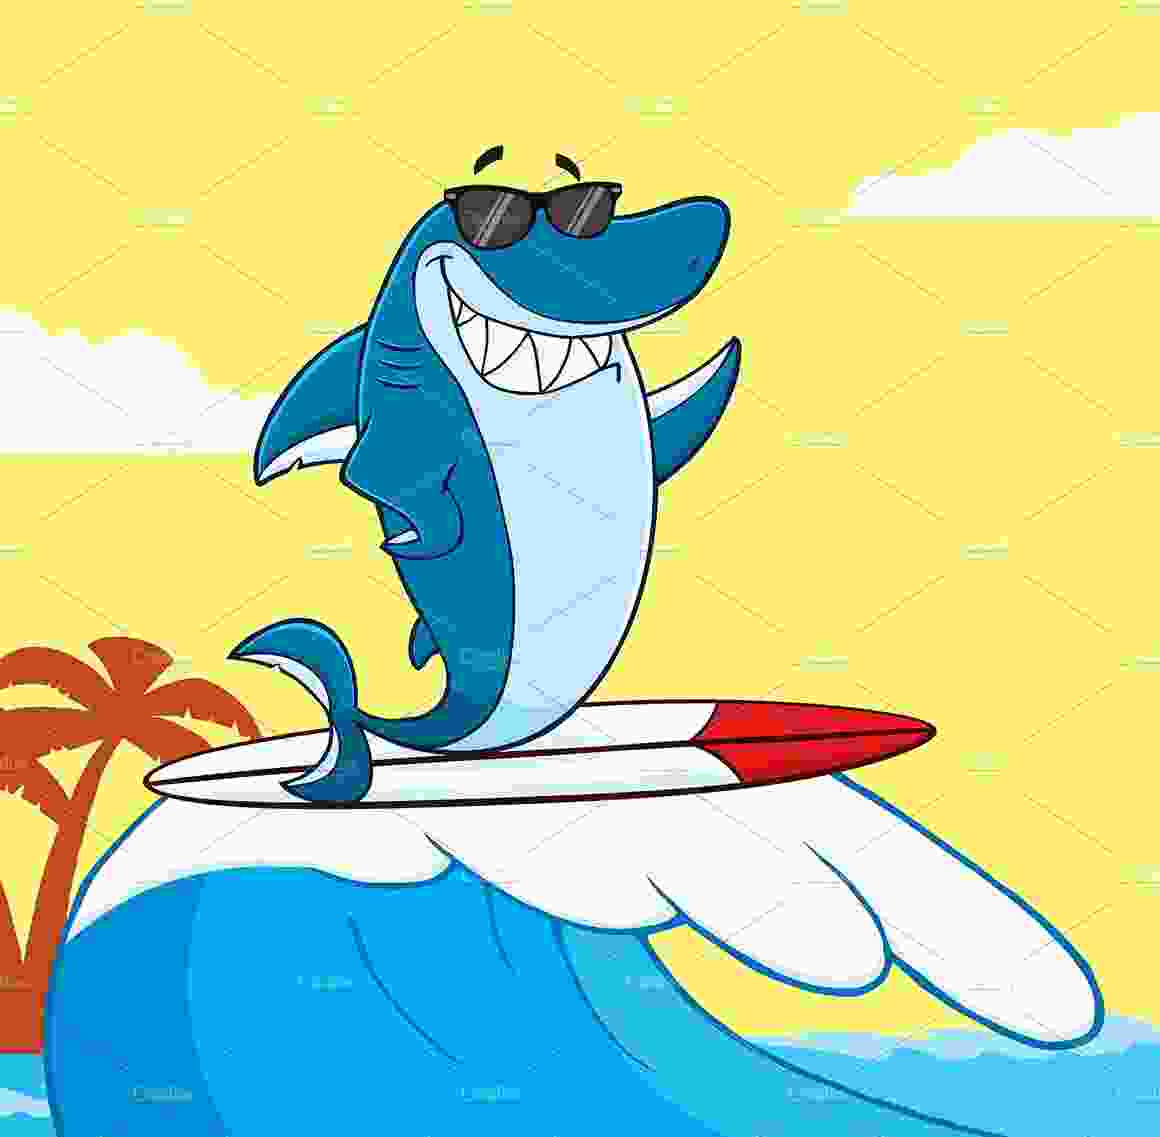 Cliparts Club: Surfing Shark Clipart Images.